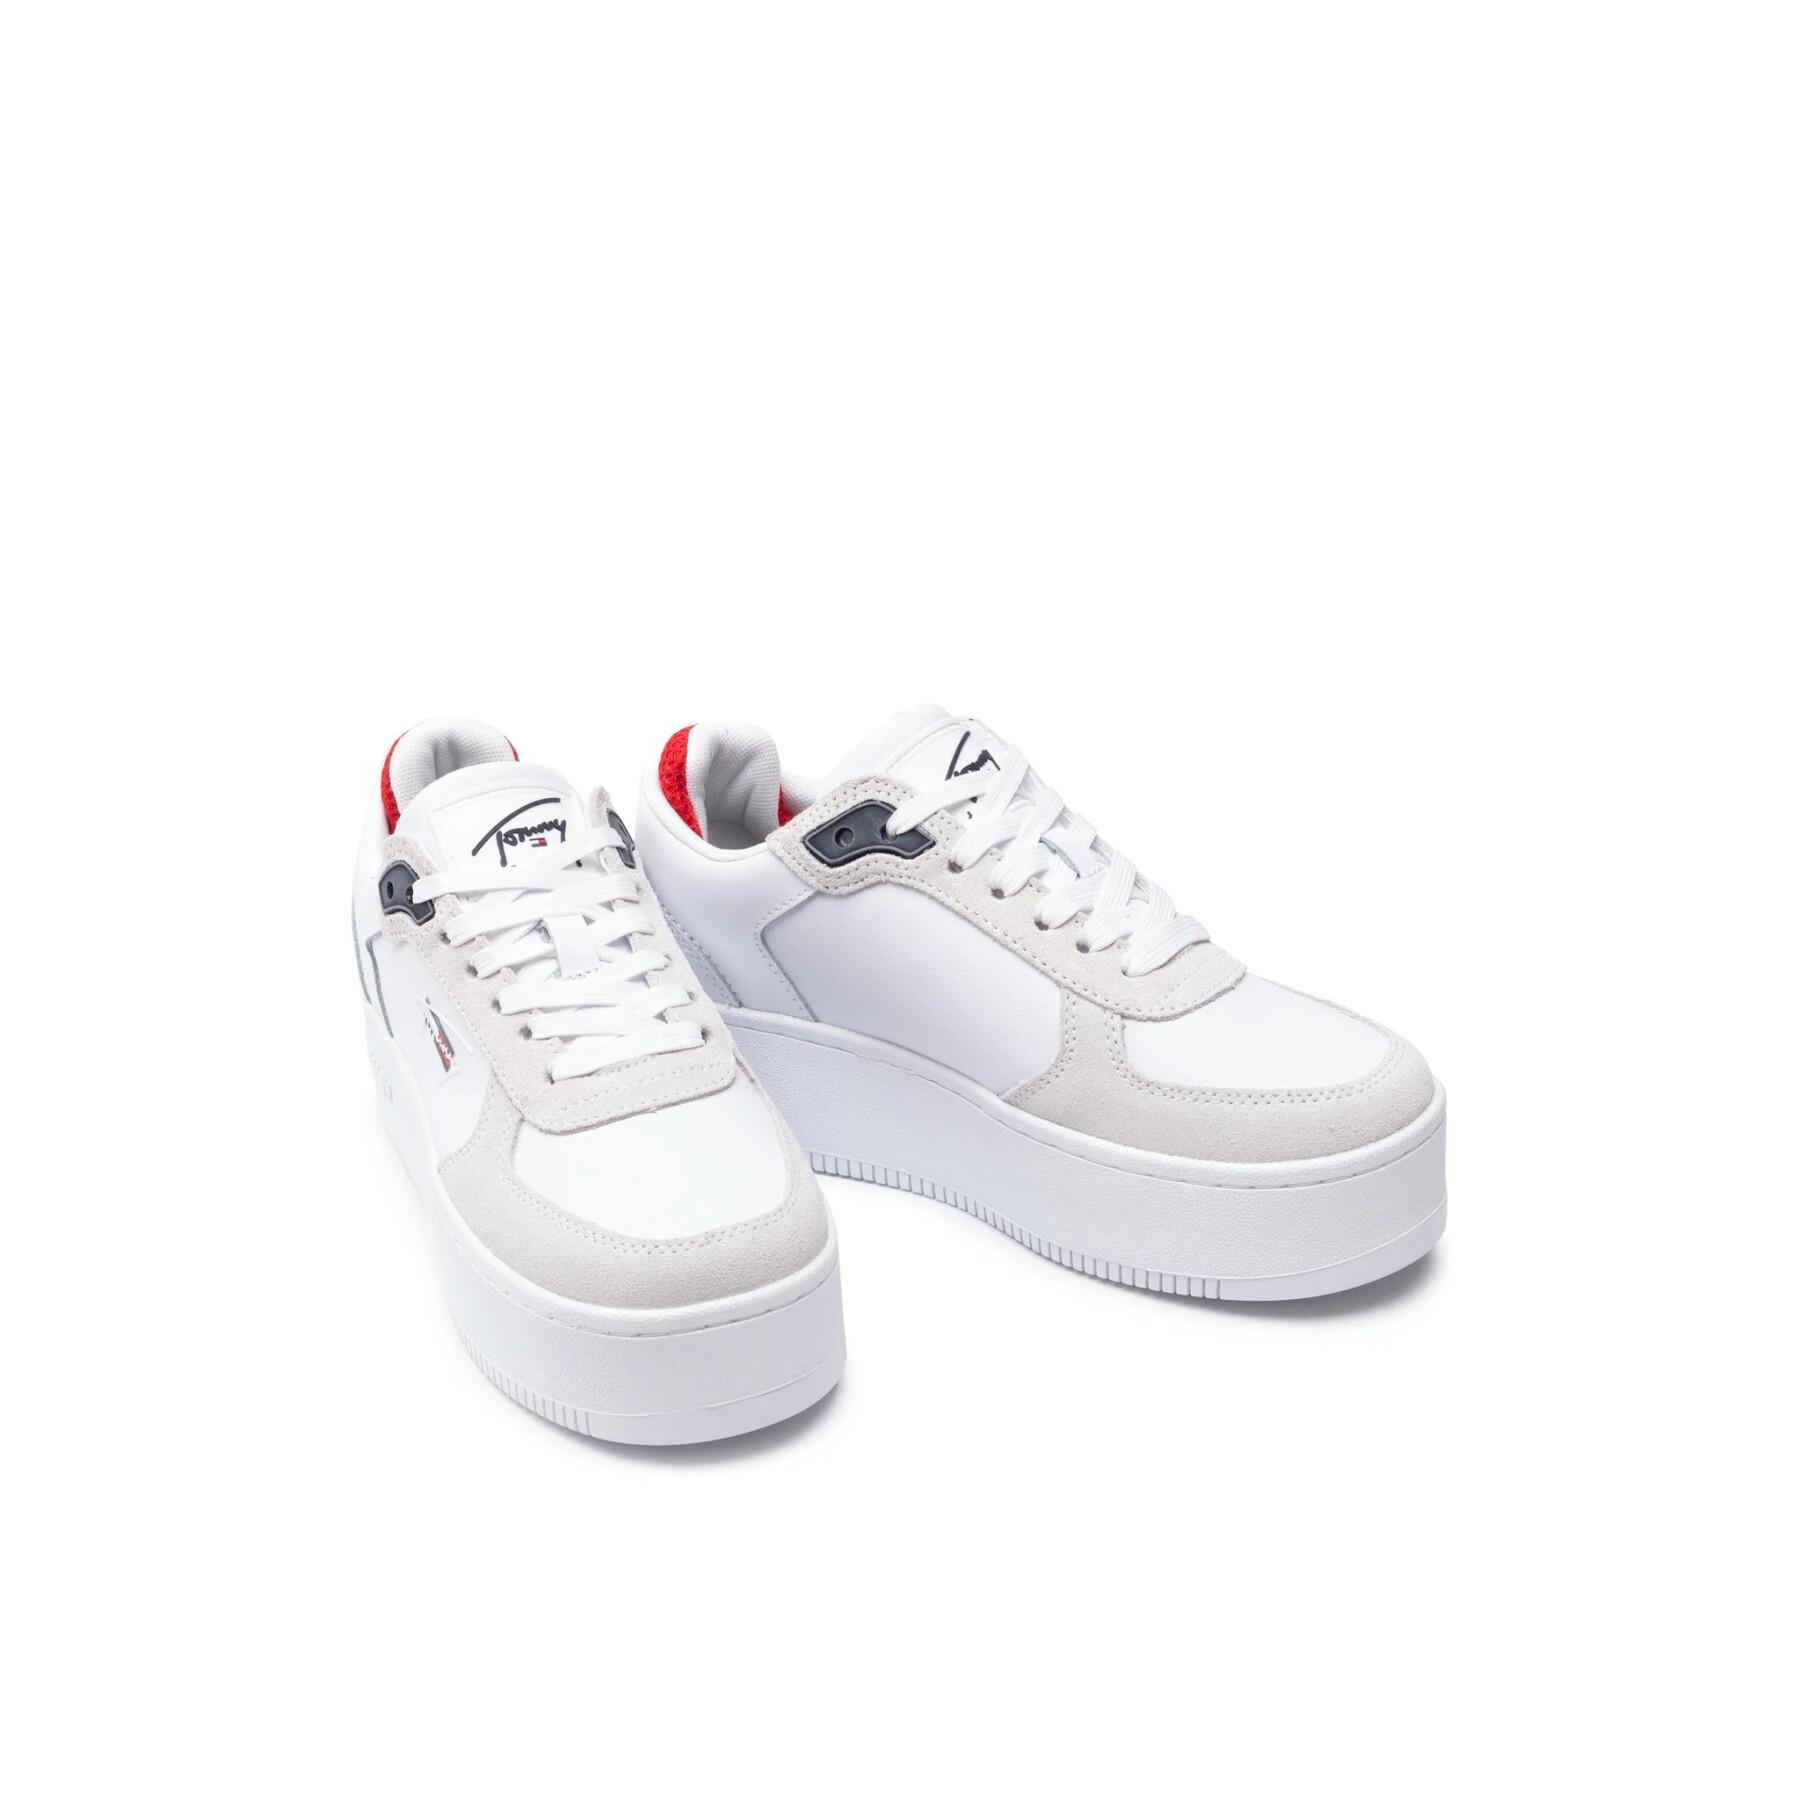 Women's sneakers Tommy Hilfiger Iconic Flatform